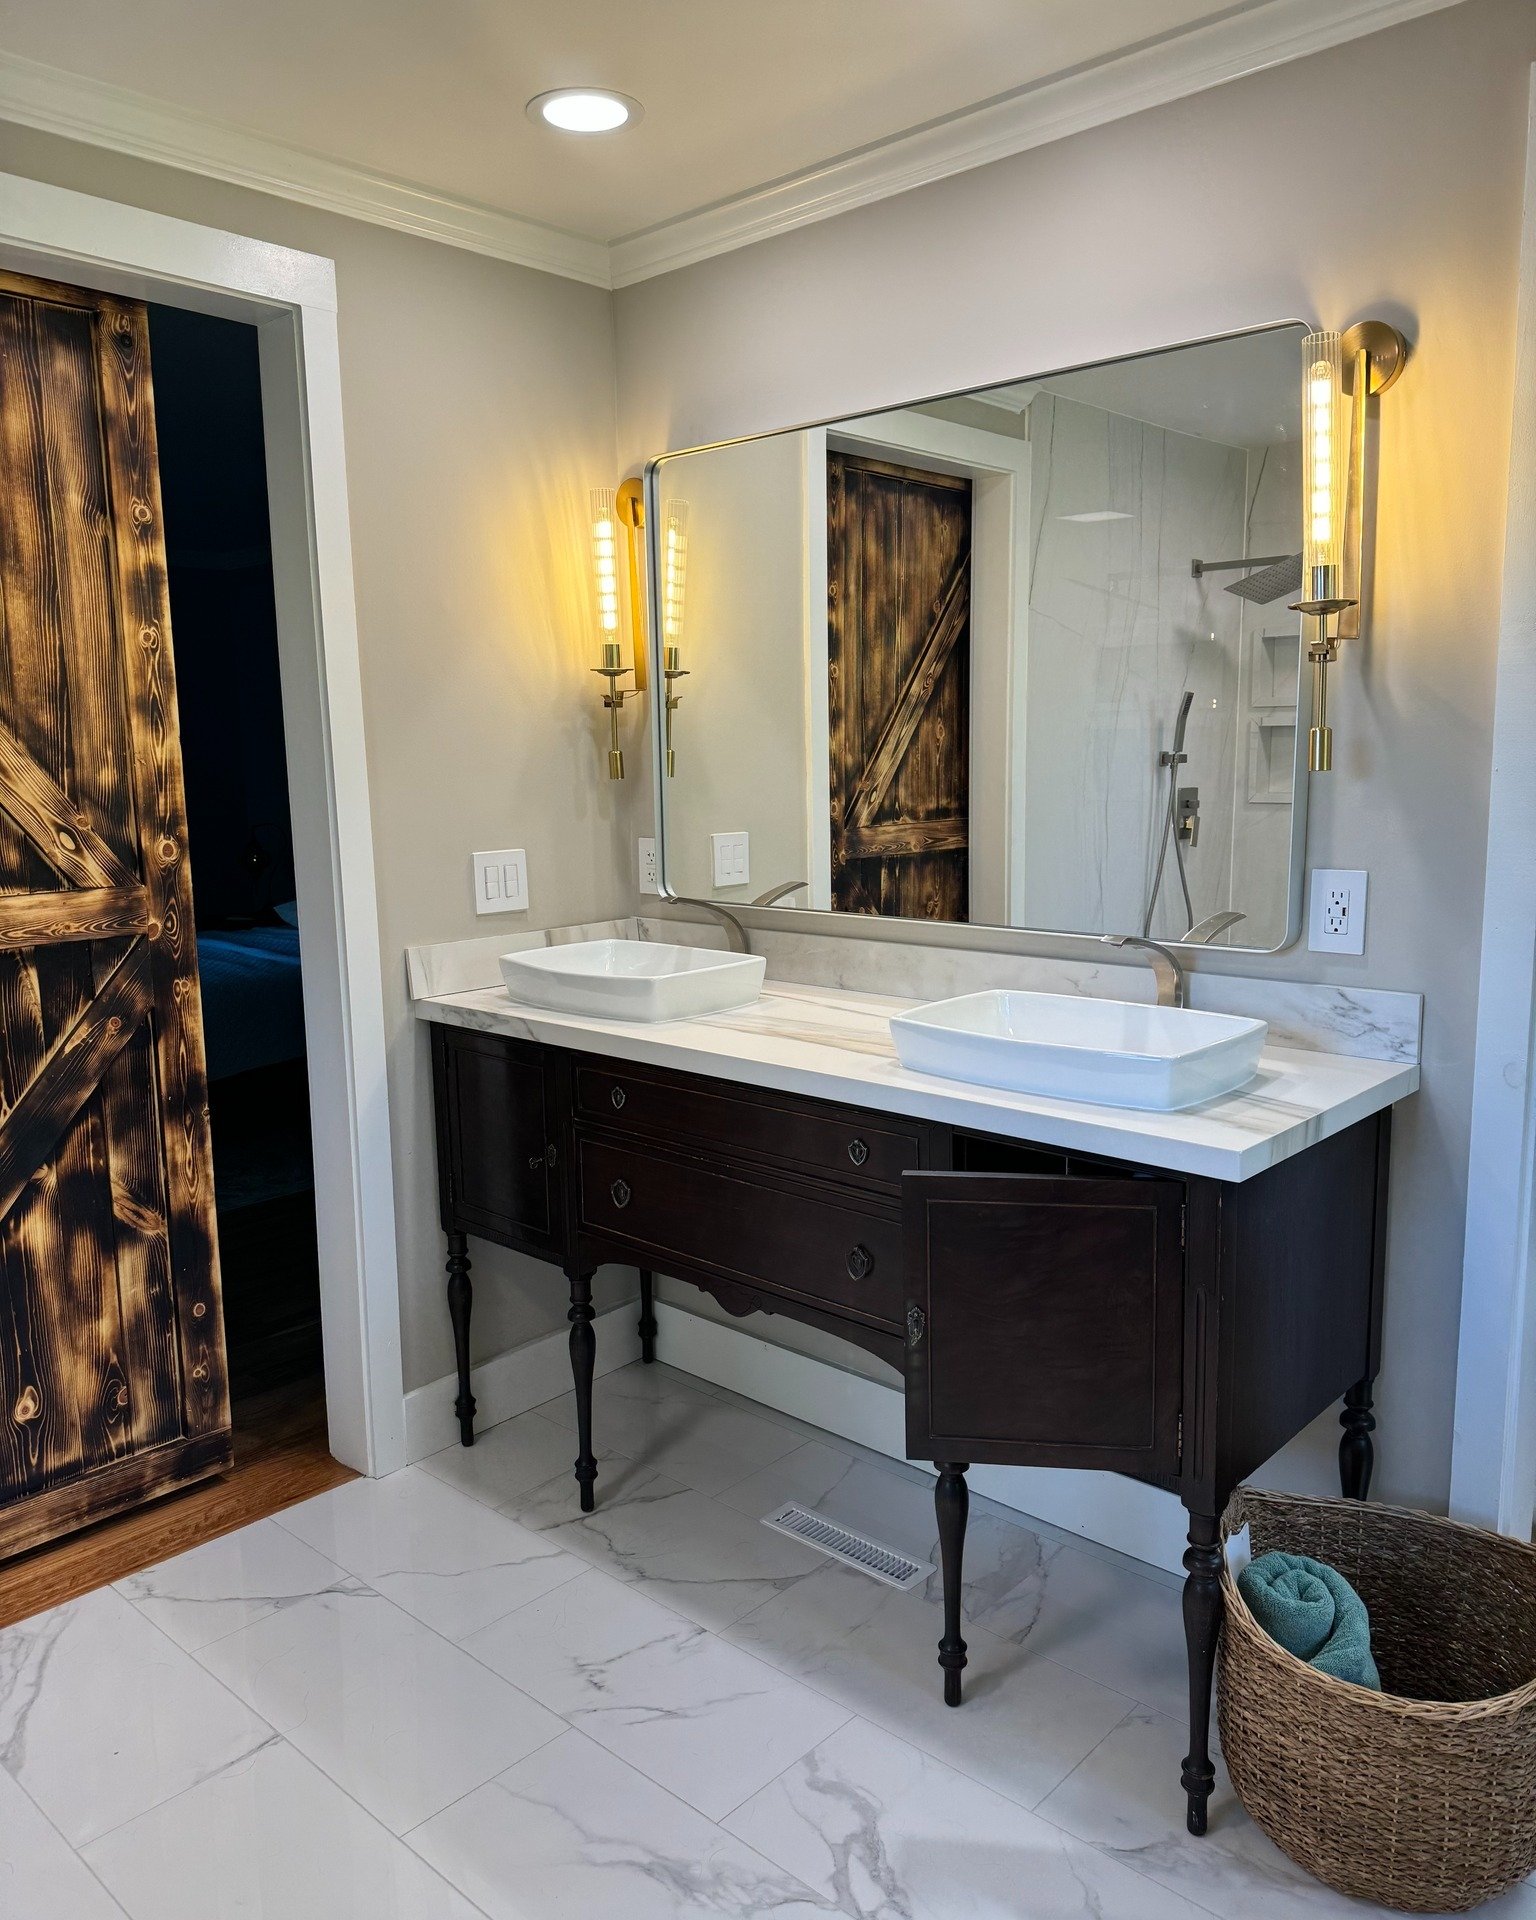 Putting the finishing touches on this #custommade #bathroom. Our artisans completed this bathroom's #Porcelain #Vanity top on a #vintage dresser and full wall Porcelain Shower Wall.